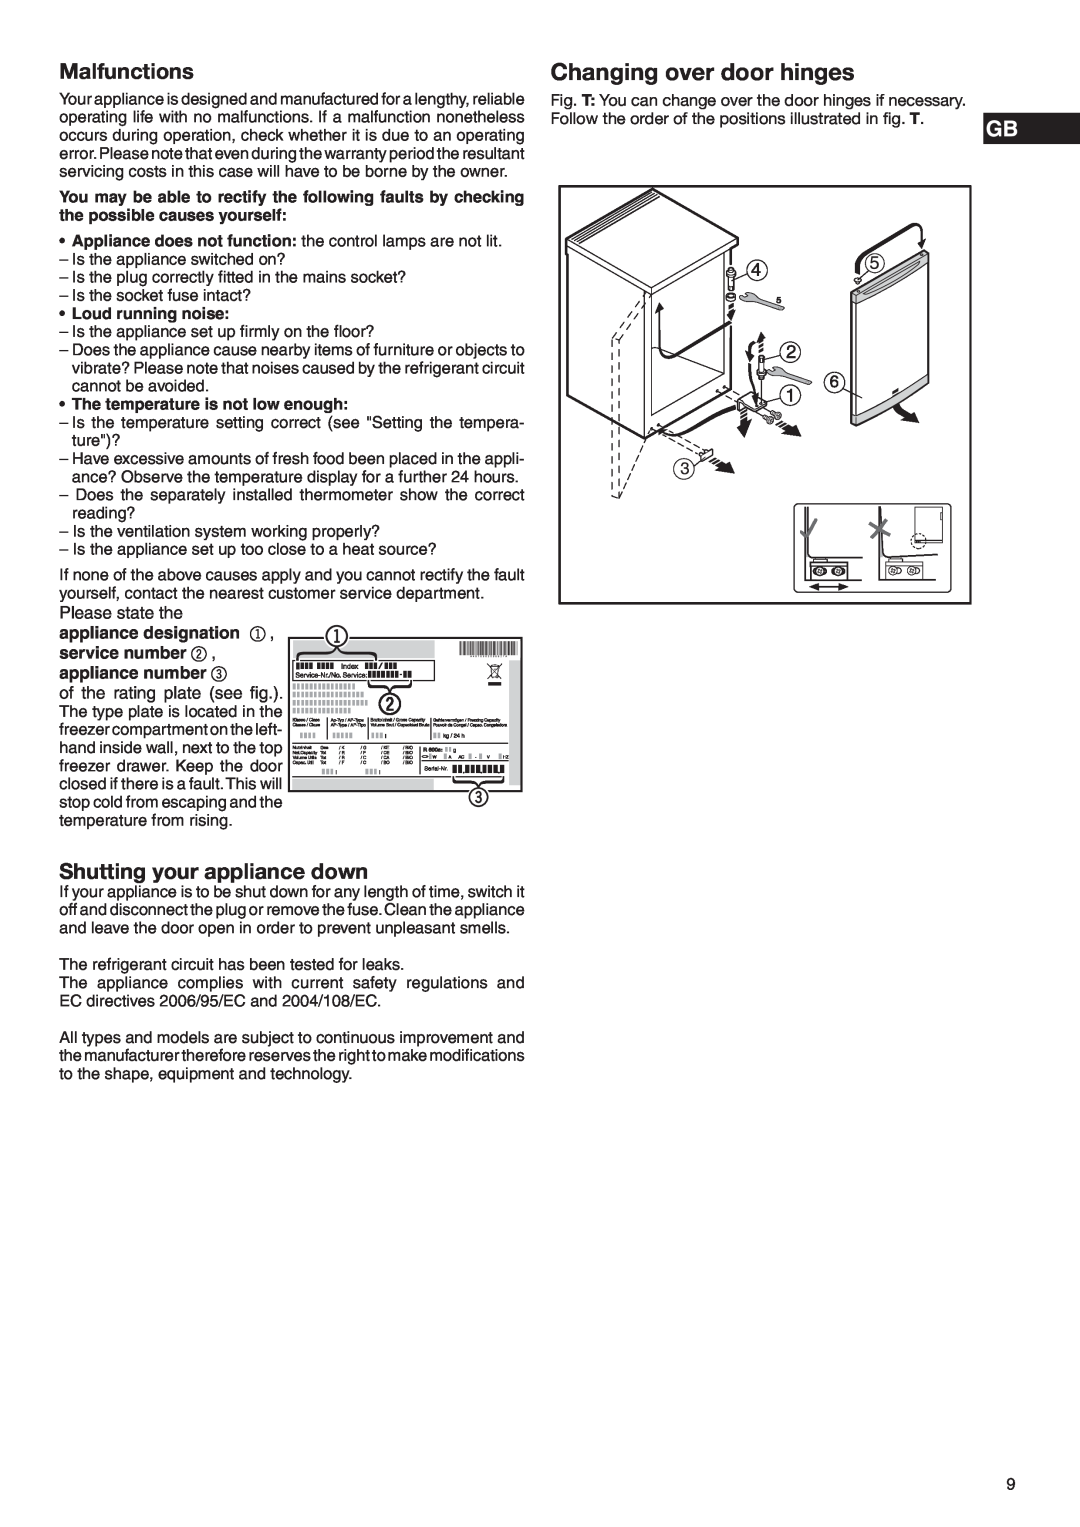 Liebherr 7080 904-00 manual Changing over door hinges, Malfunctions, Shutting your appliance down, Please state the 